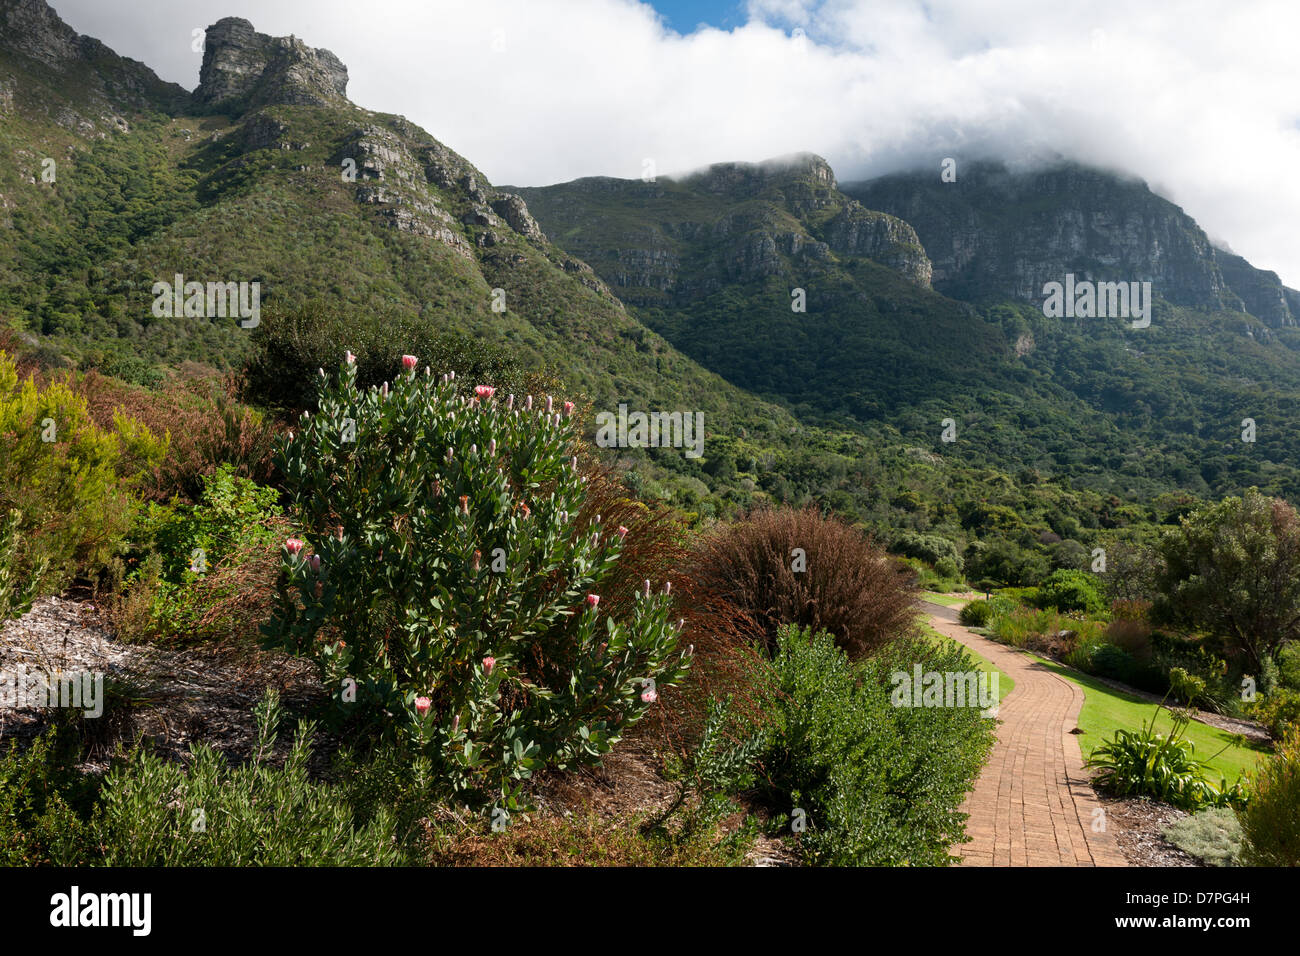 Kirstenbosch National Botanical Garden on the footslopes of Table Mountain, Cape Town, South Africa Stock Photo